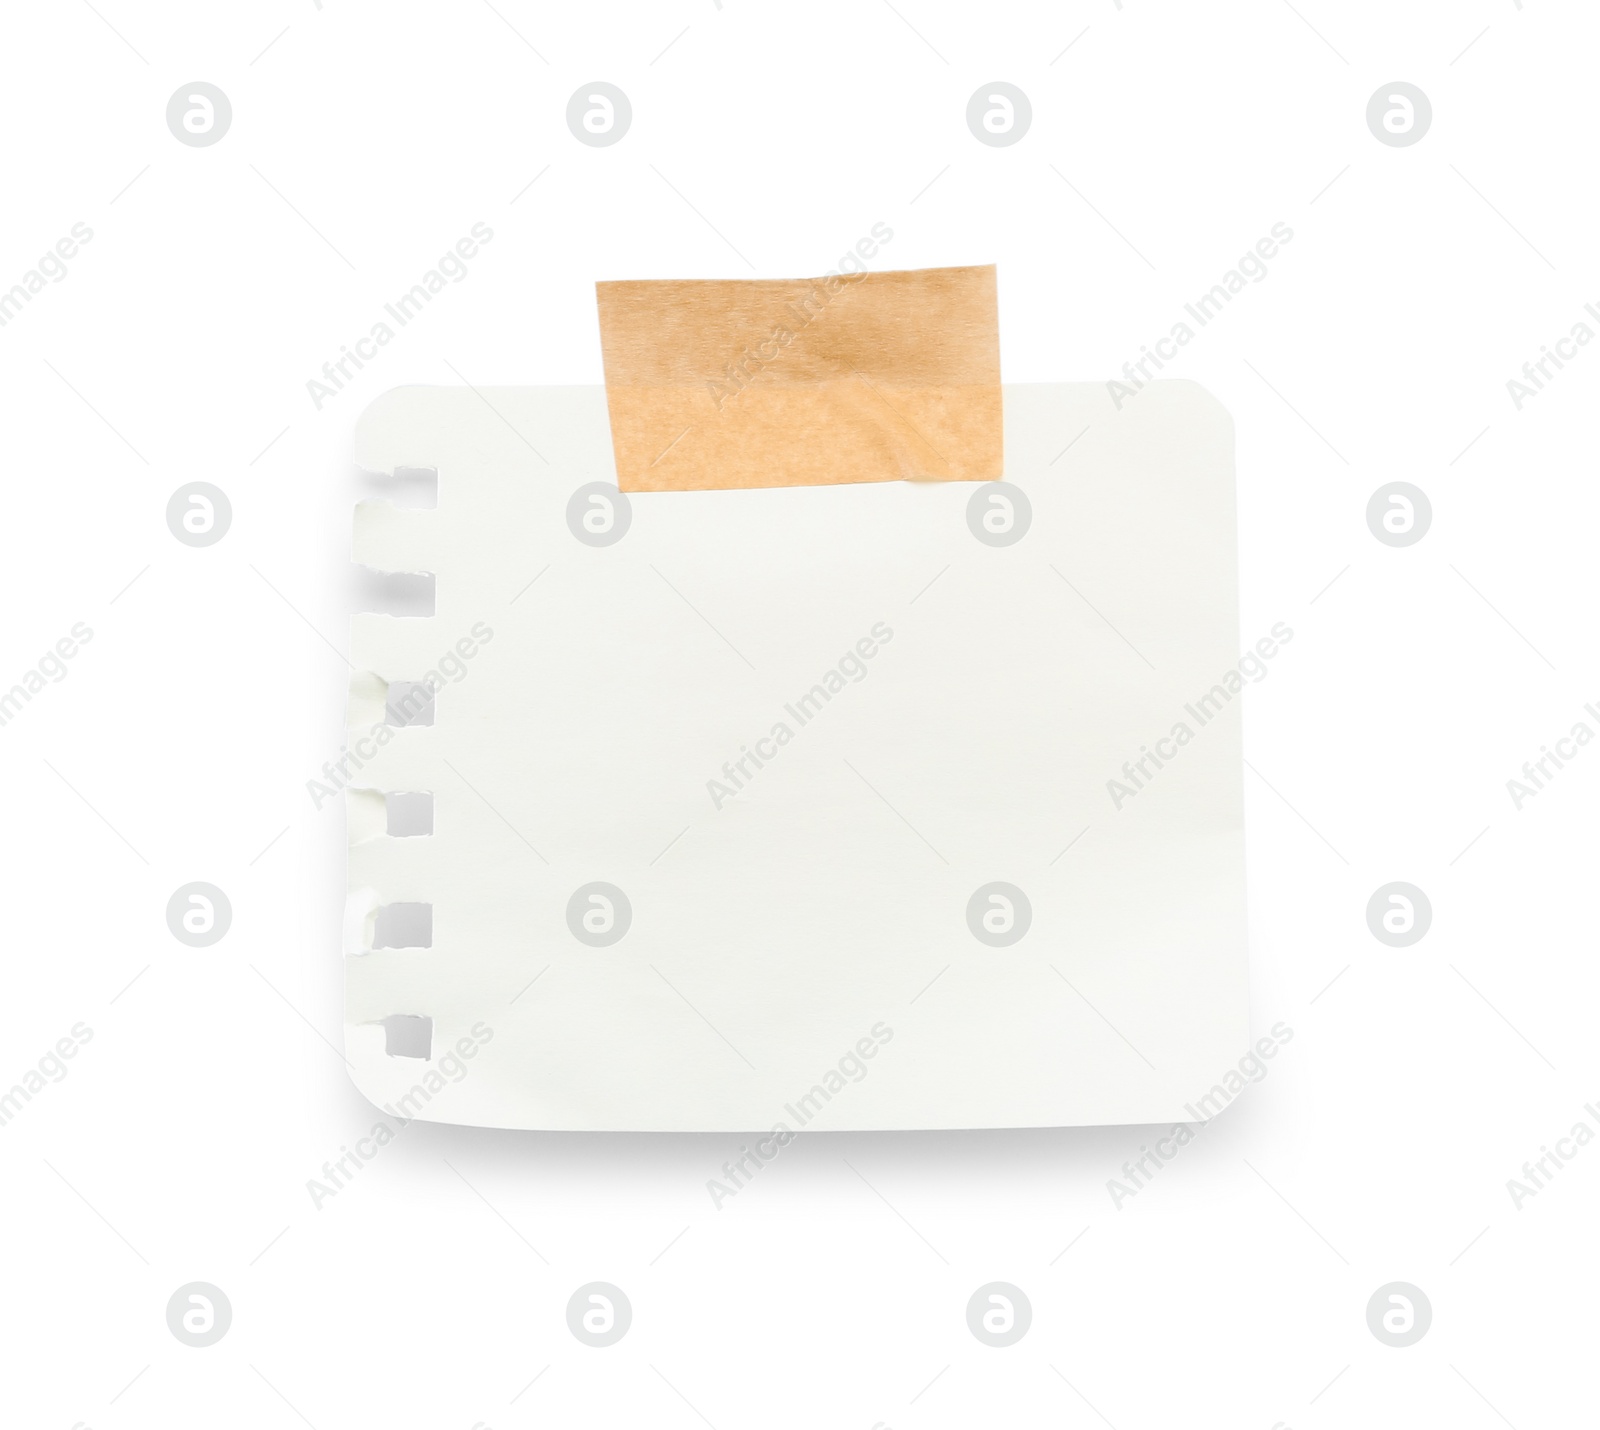 Photo of Blank notebook sheet and adhesive tape isolated on white